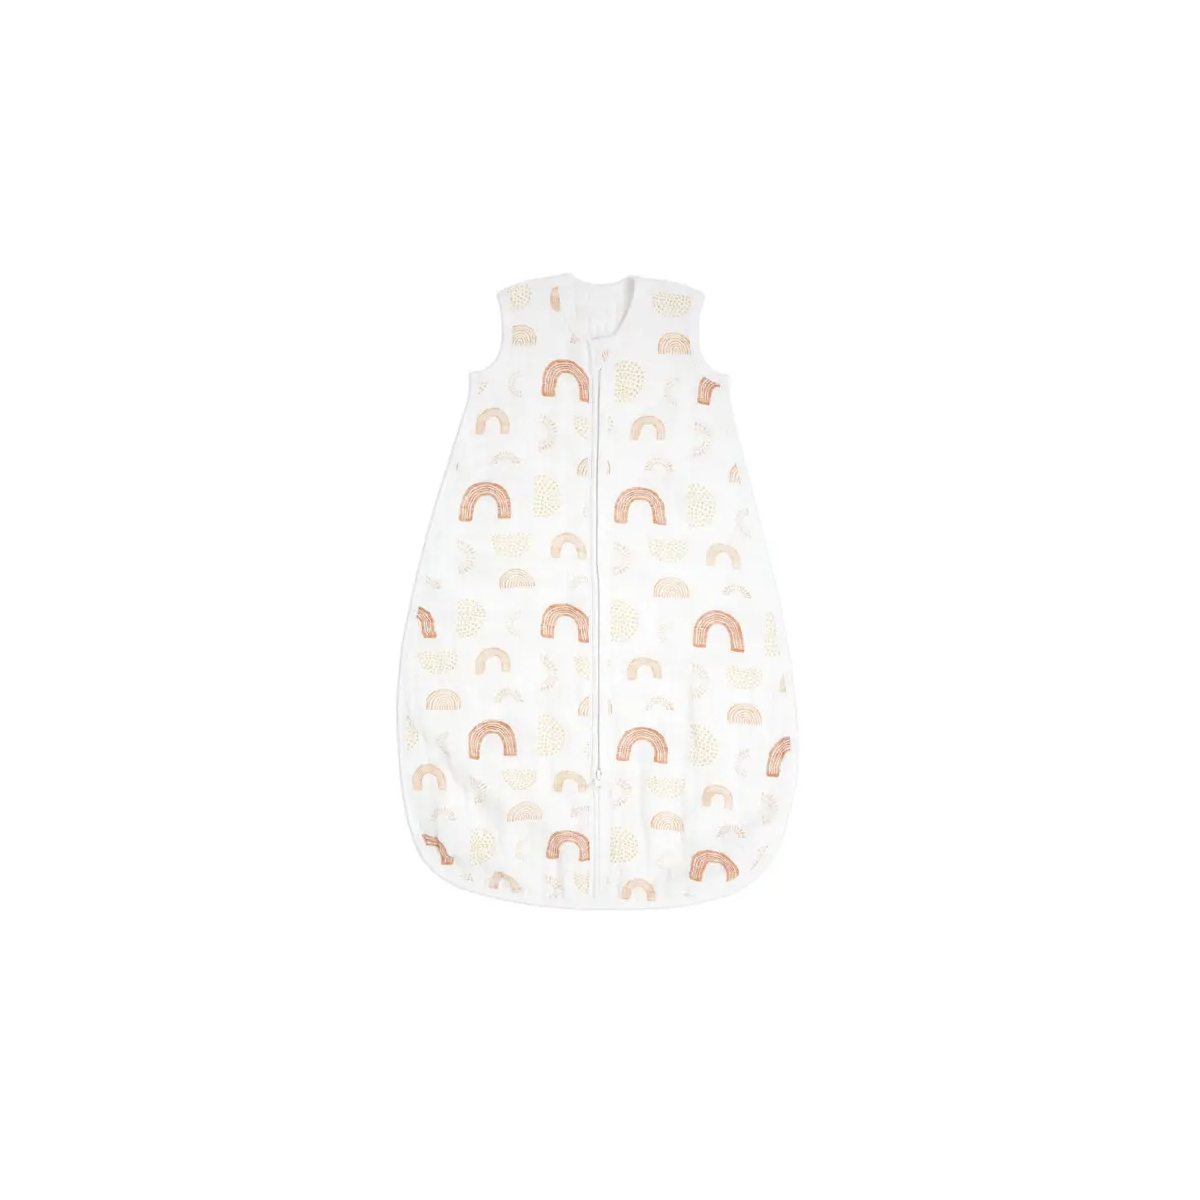 Image of Aden + Anais Light Sleeping Bag 1.0 TOG Cotton Muslin 18-36 Months - Keep Rising/Oh Happy Day (23-19-163)